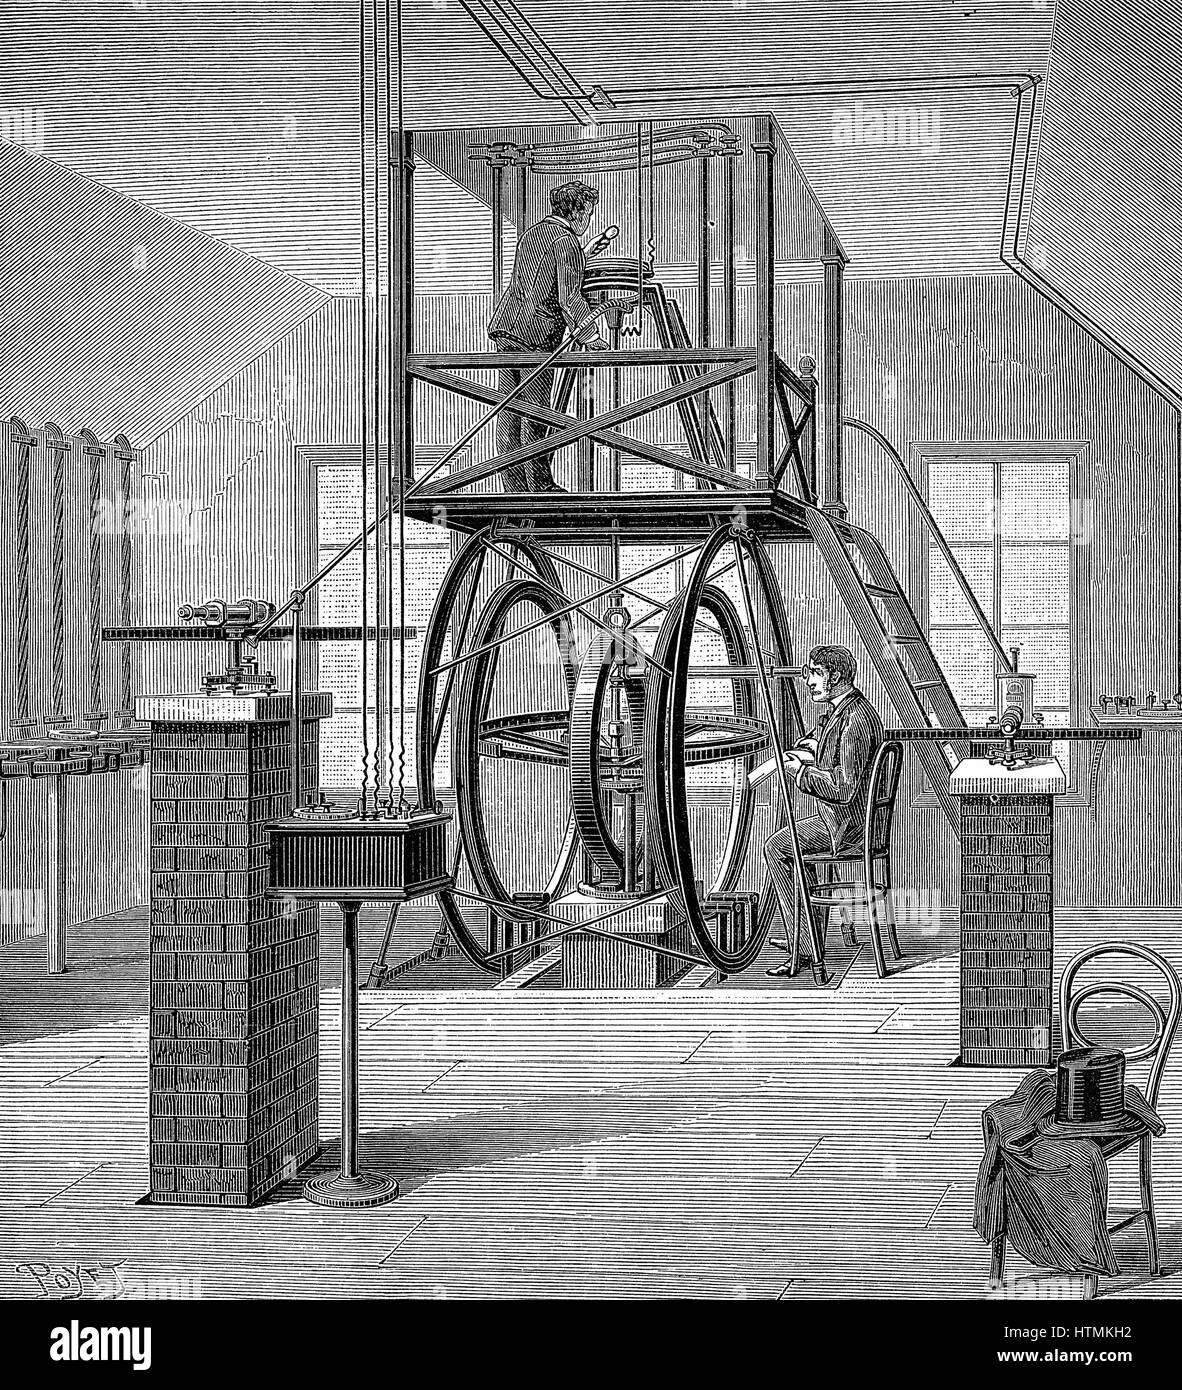 Giant galvanometer (instrument for measuring small electric currents) in the Physics Laboratory, Cornell University. Wood engraving 1886 Stock Photo